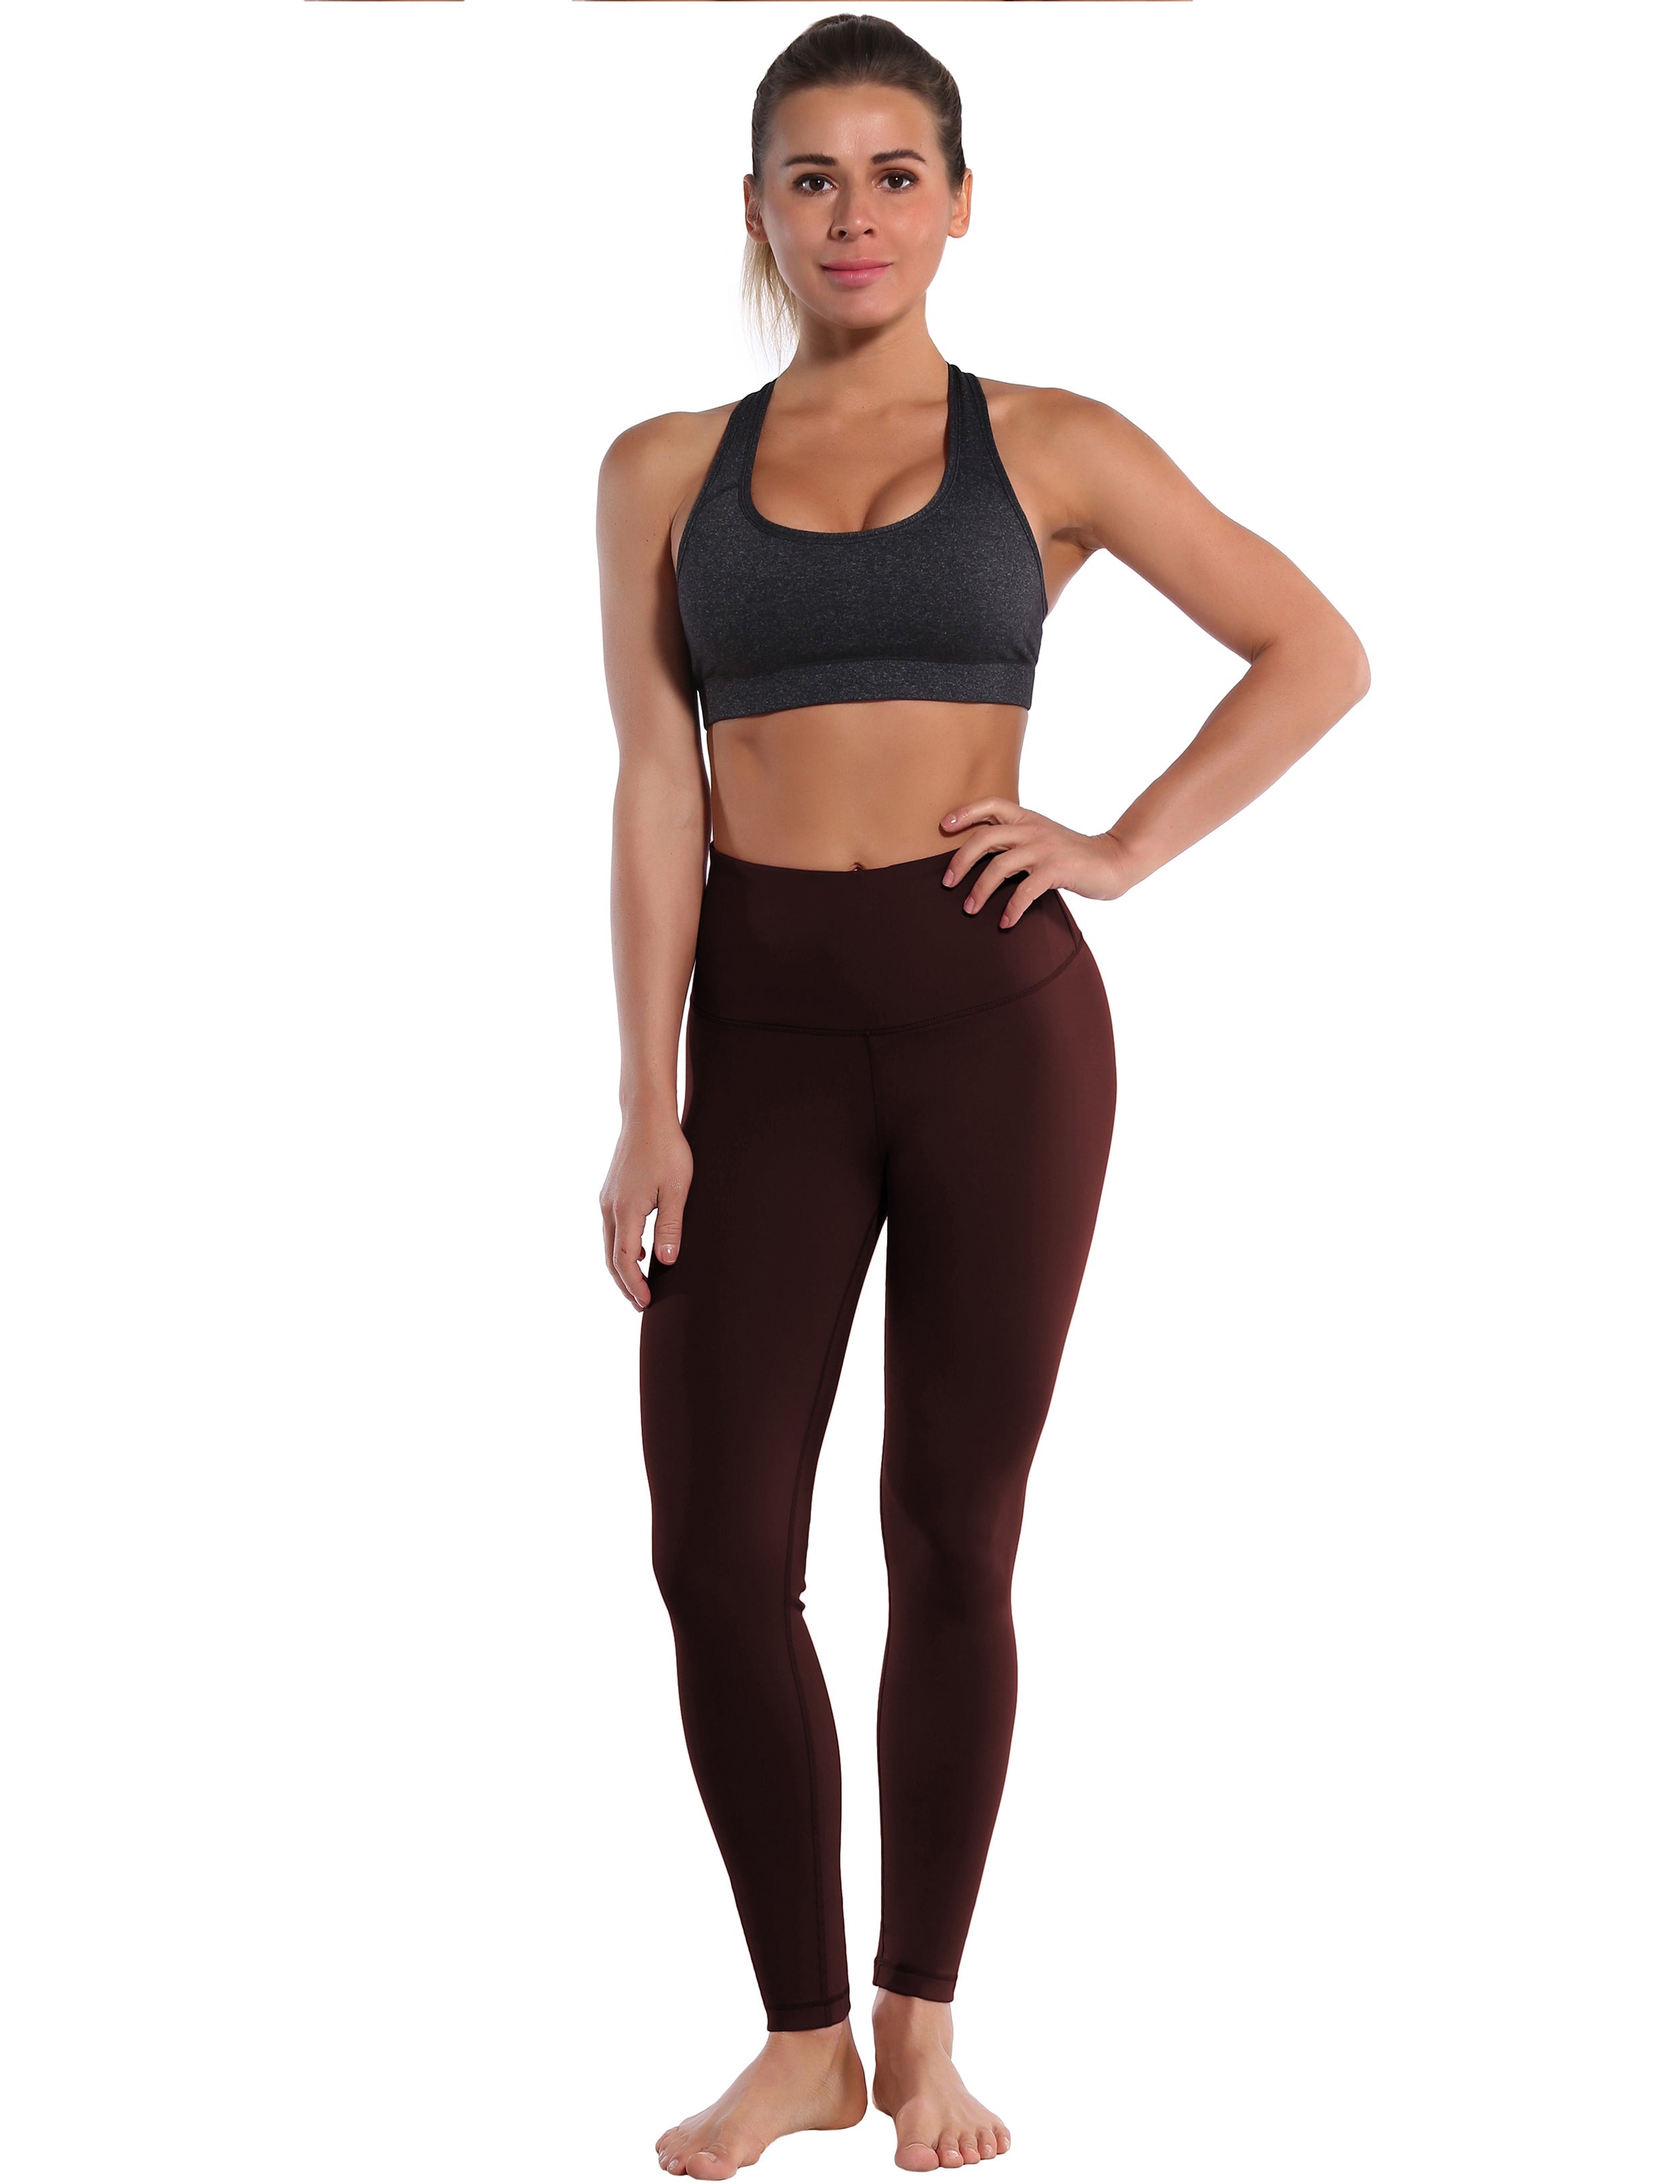 High Waist Running Pants mahoganymaroon 75%Nylon/25%Spandex Fabric doesn't attract lint easily 4-way stretch No see-through Moisture-wicking Tummy control Inner pocket Four lengths